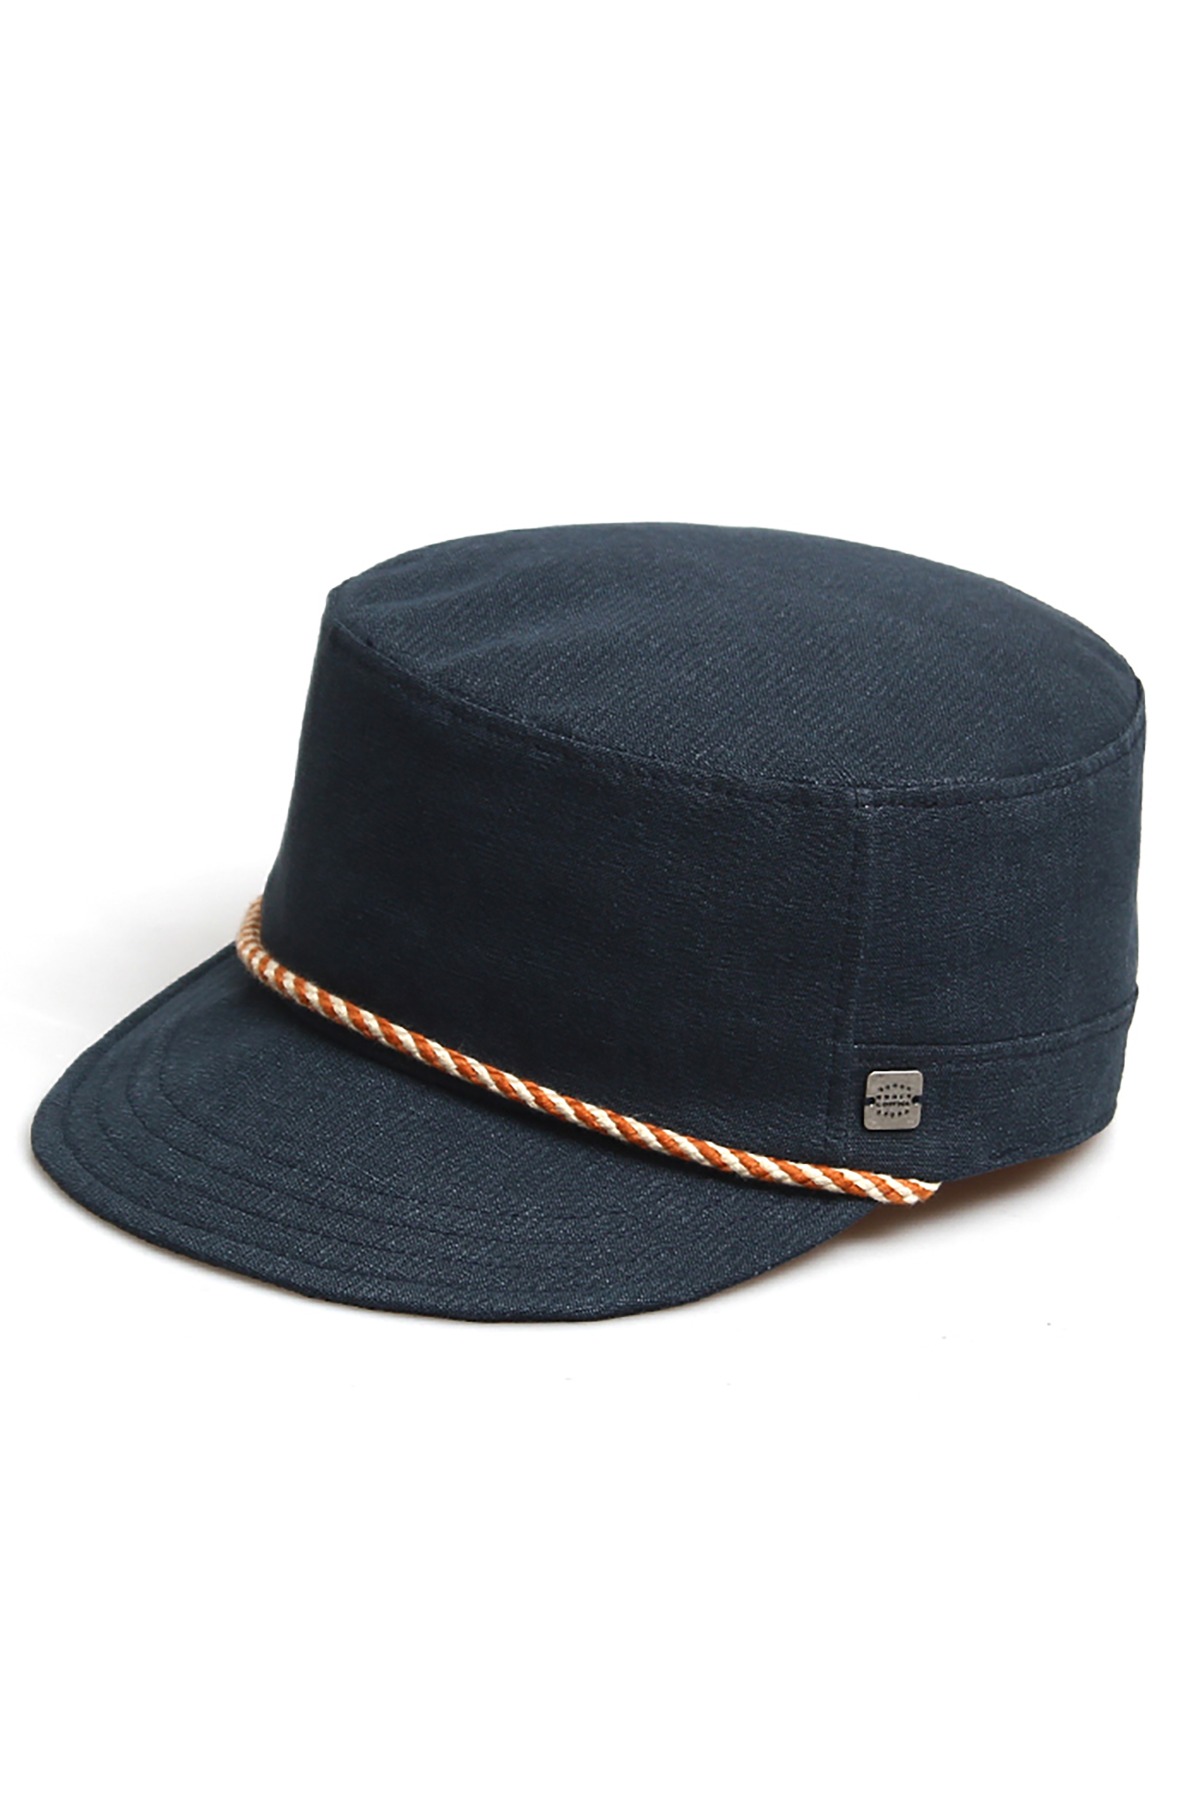 DELIVERY MAN / ROPE / BIO NAVY